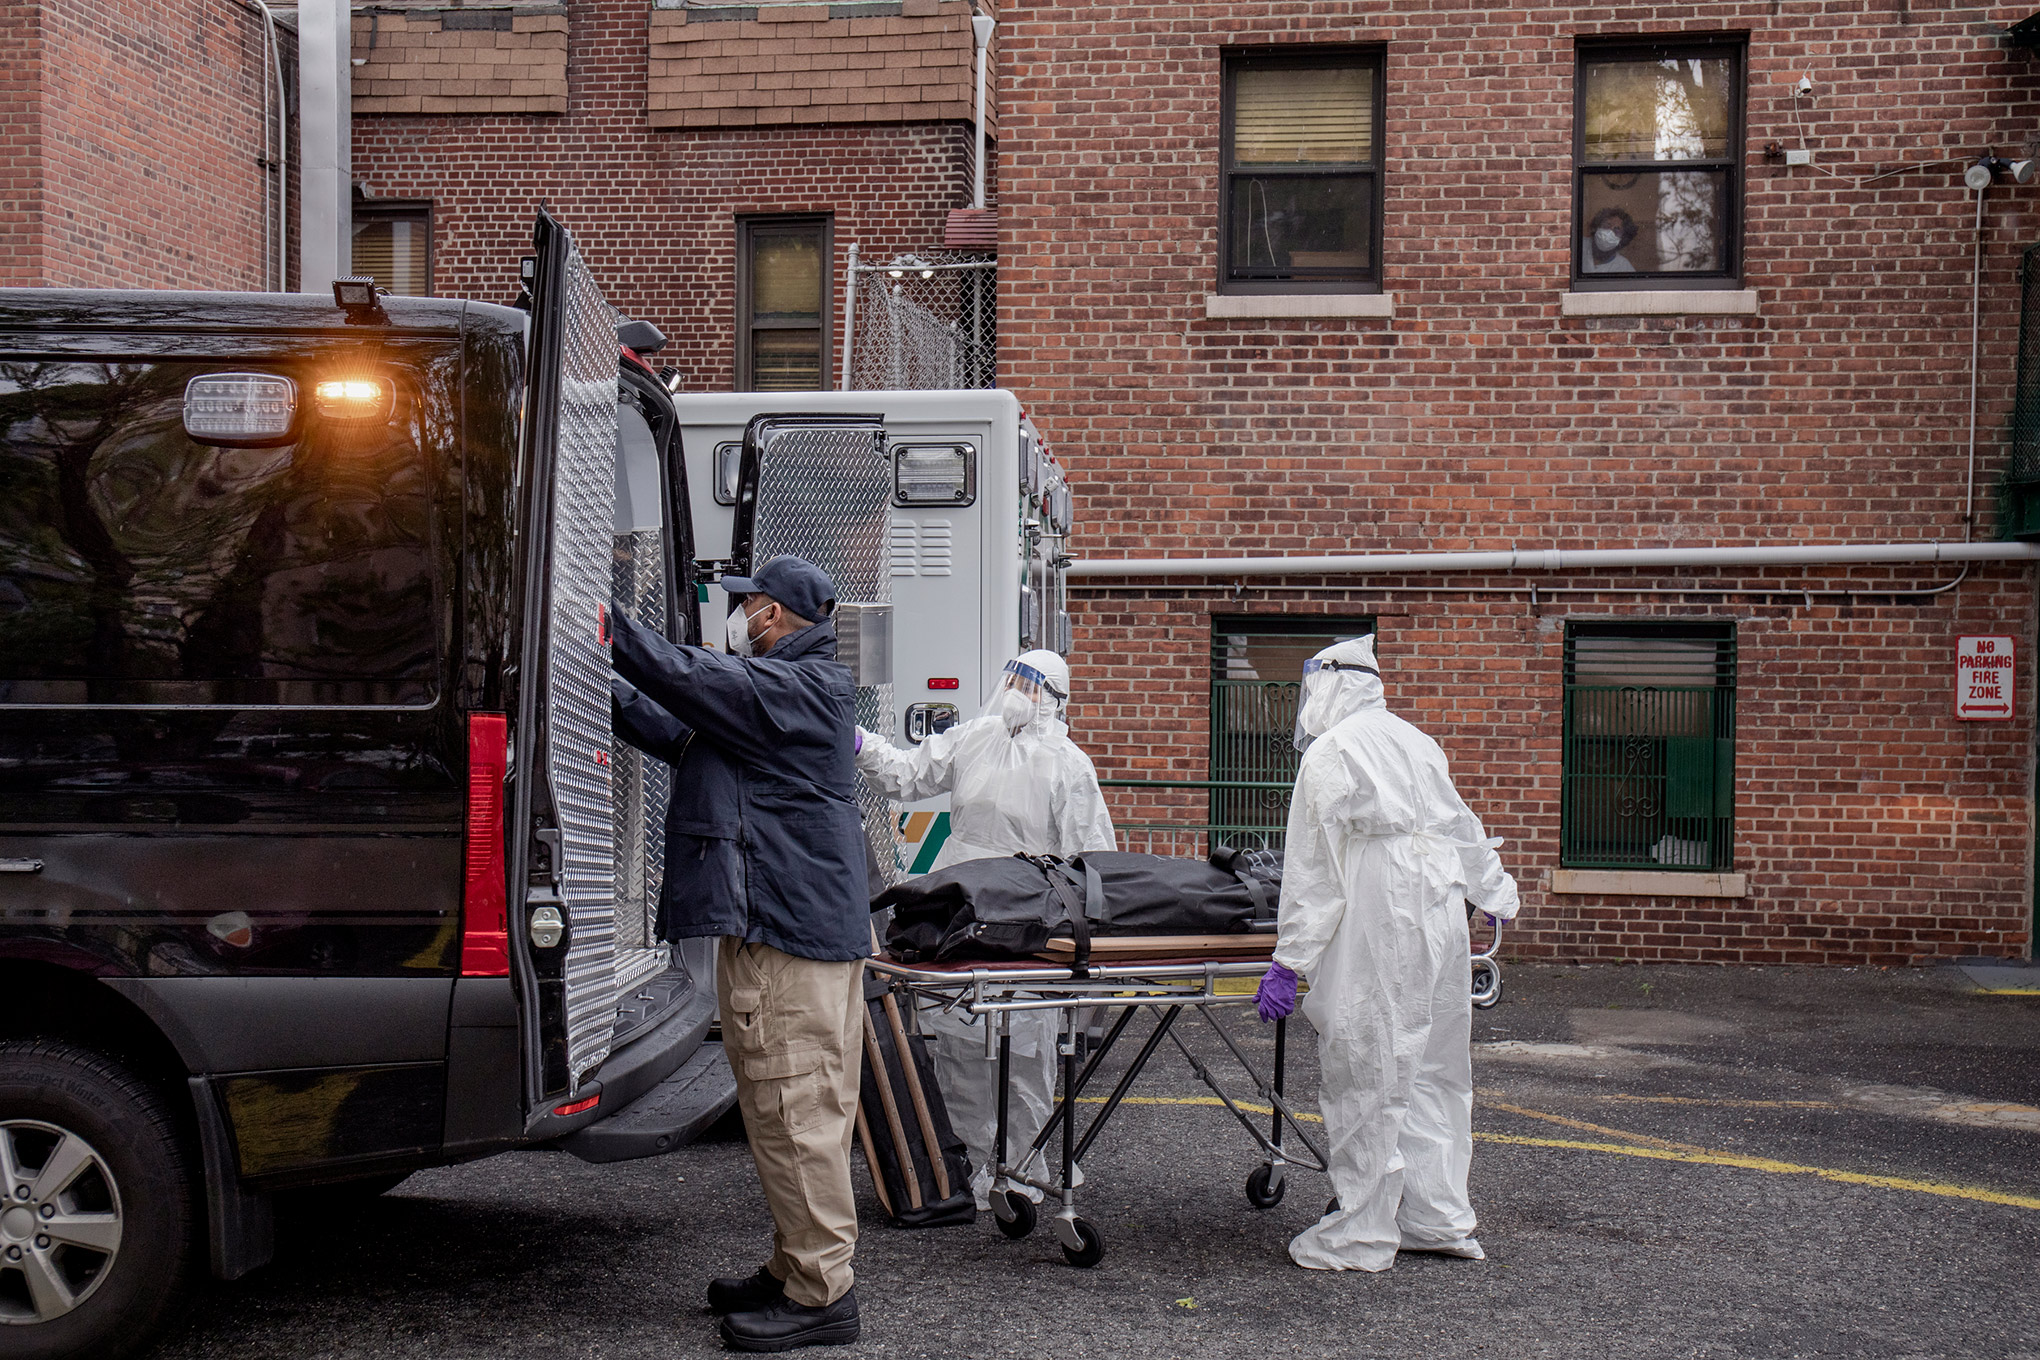 A collection team removes remains from a residence in the Bronx on May 8. Twelve hour shifts have become routine. (Natalie Keyssar for TIME)